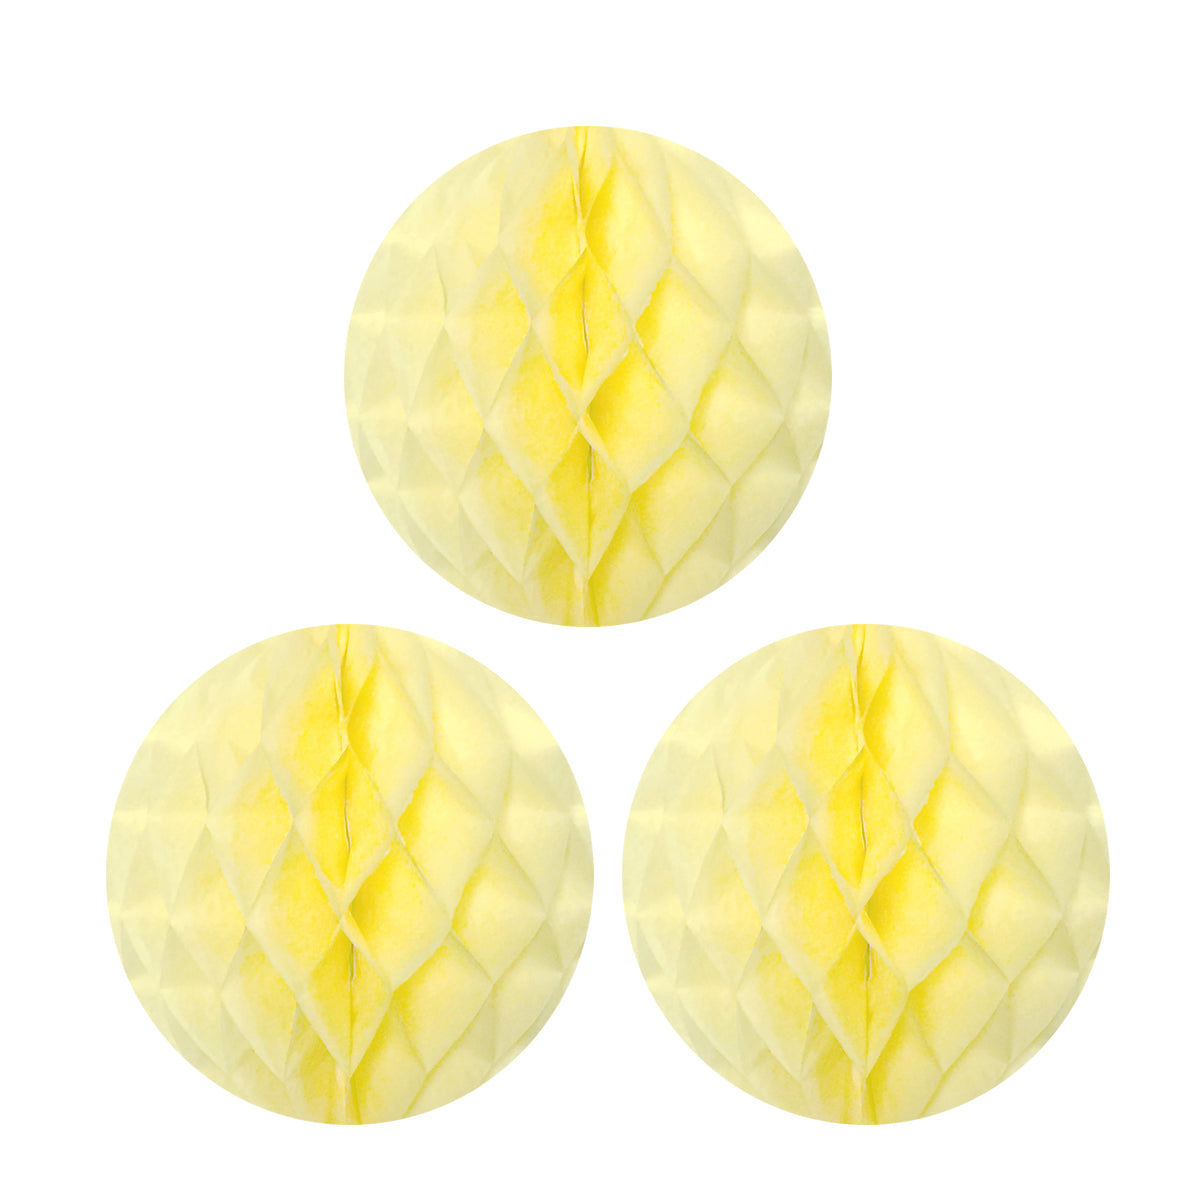 Wrapables 10" Set of 3 Tissue Honeycomb Ball Party Decorations